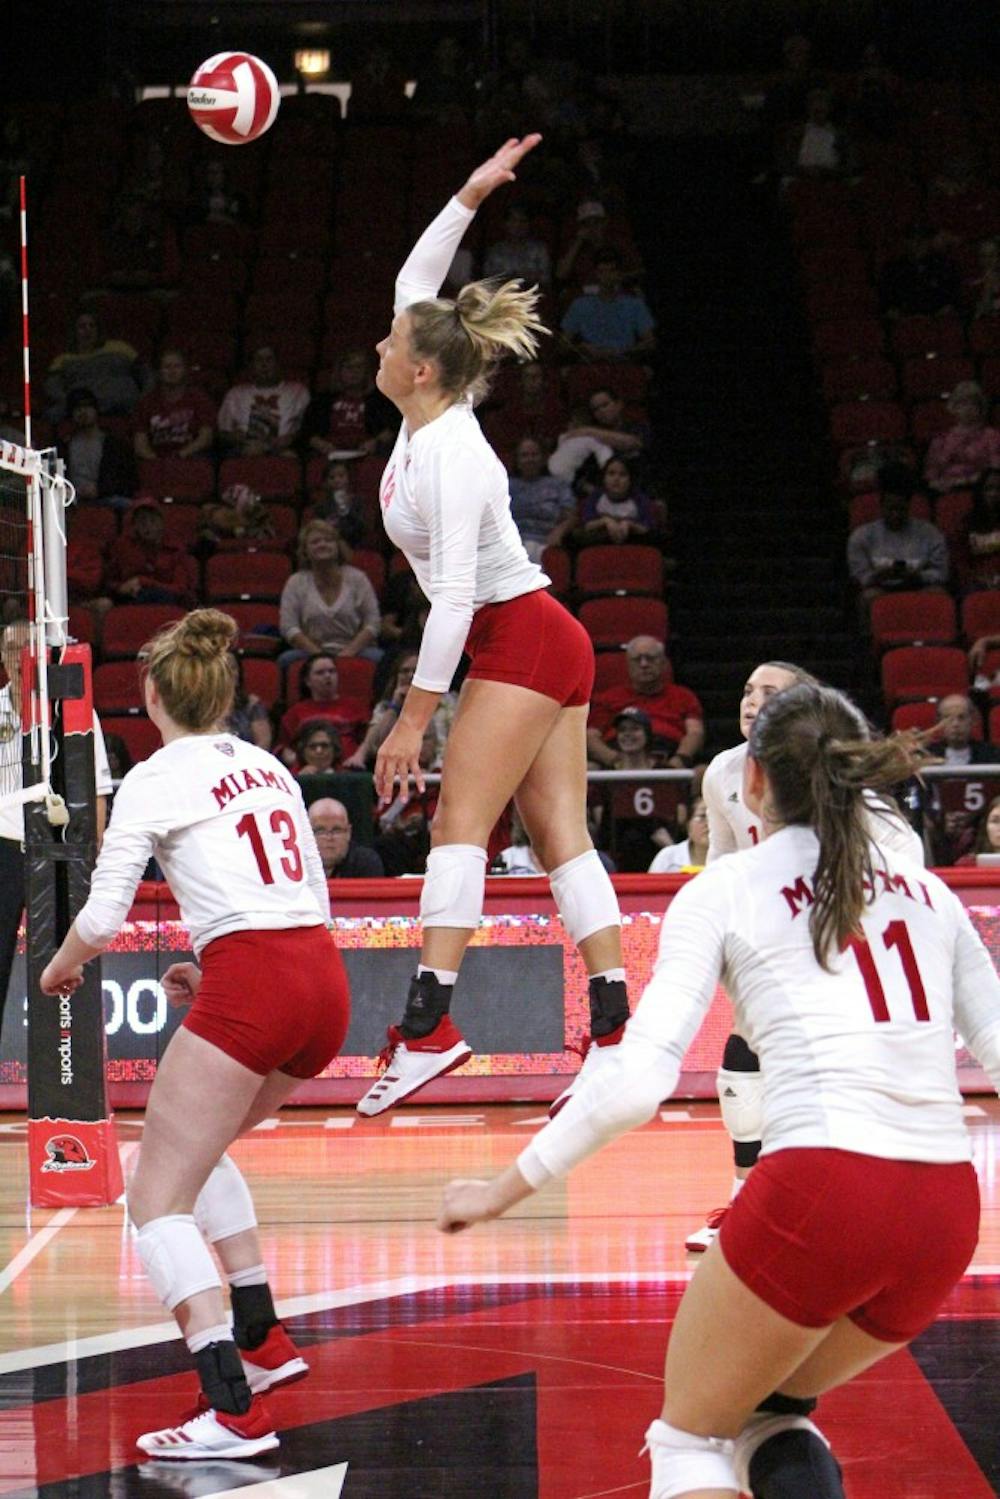 Junior right side Sarah Wojick hits a ball last weekend. In two games, she put down 11 kills and added six digs.